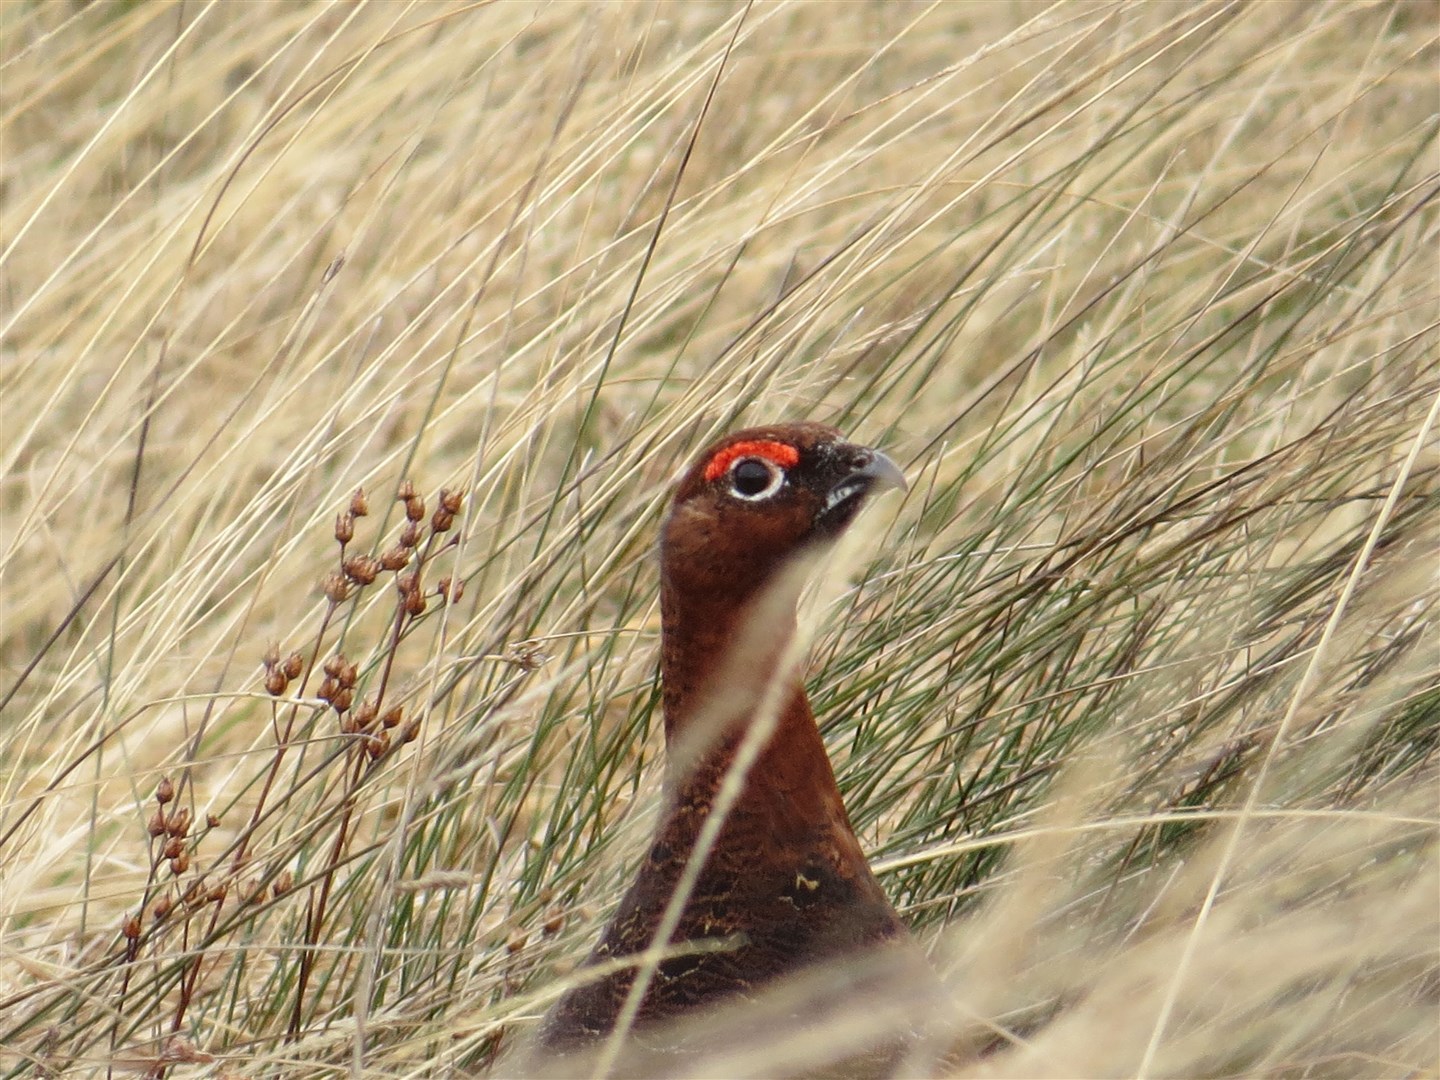 The Red Grouse was taken at Broubster, trying to hide from me.